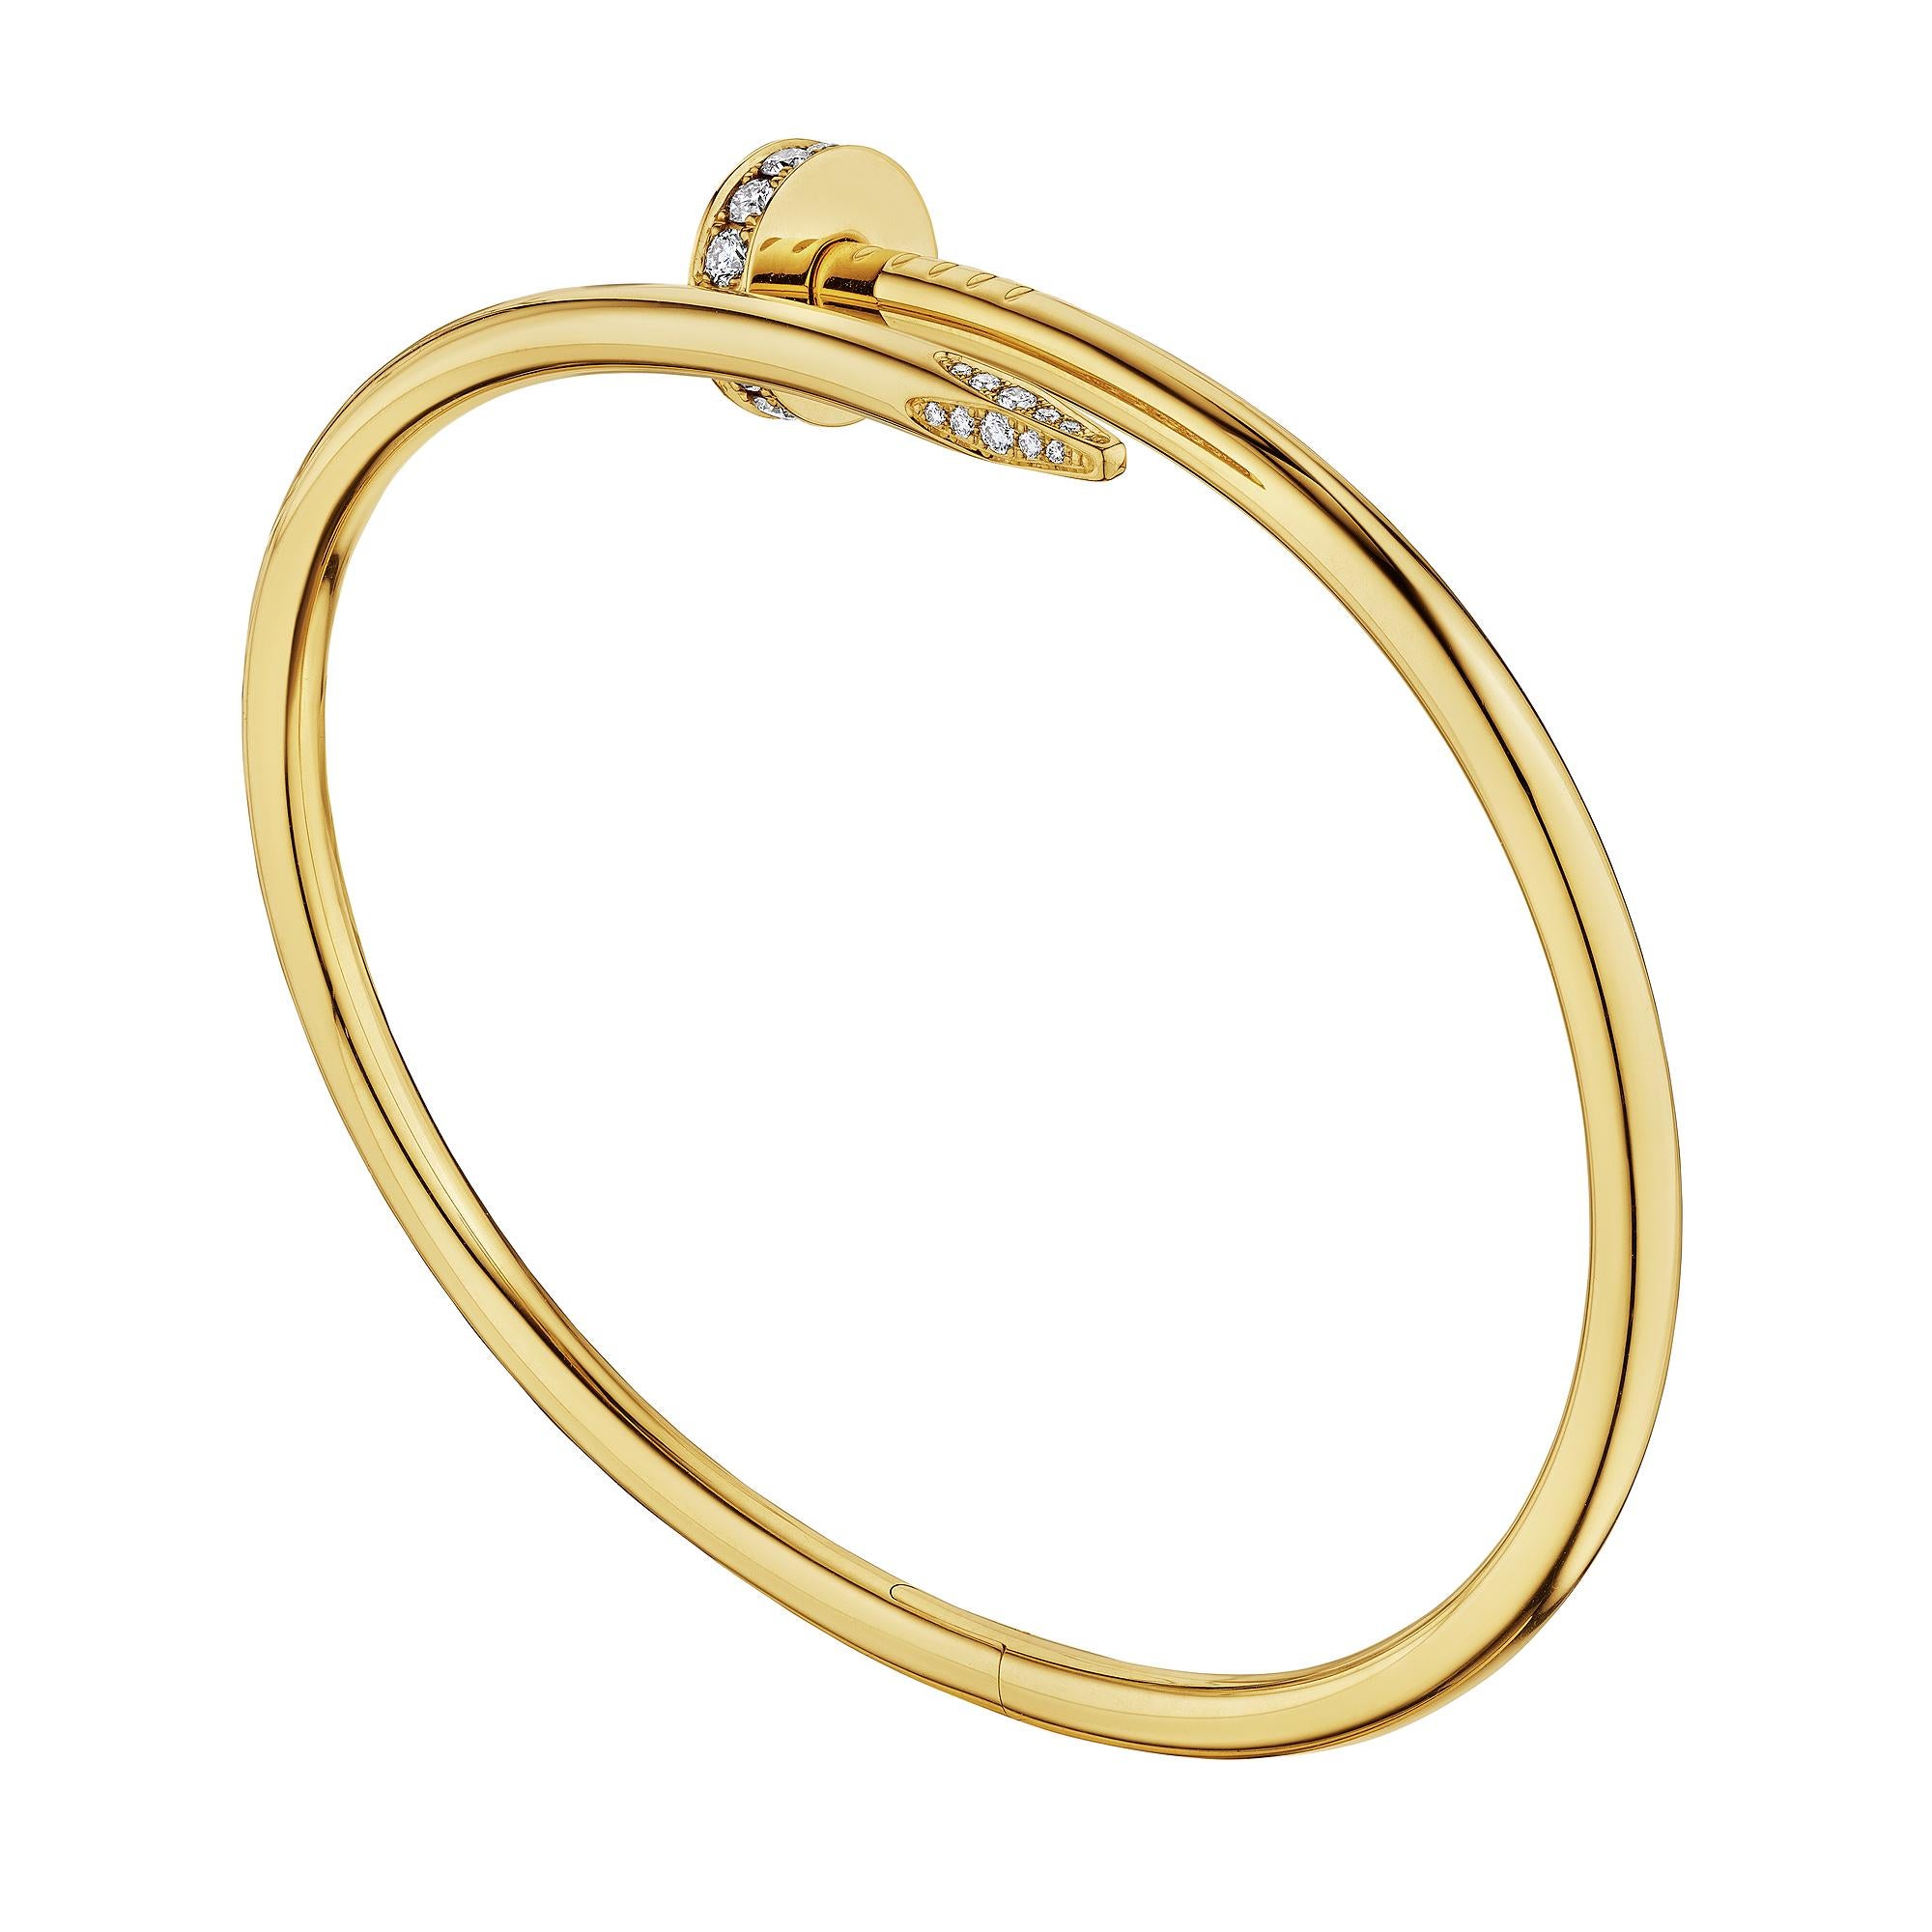 Nail it shut with this Cartier modernist 'Juste Un Clou' diamond gold nail shape bracelet.  With 32 round brilliant cut diamonds, this iconic 18 karat yellow gold bracelet will pin down your wardrobe's high style.  Signed Cartier.  Stamped with